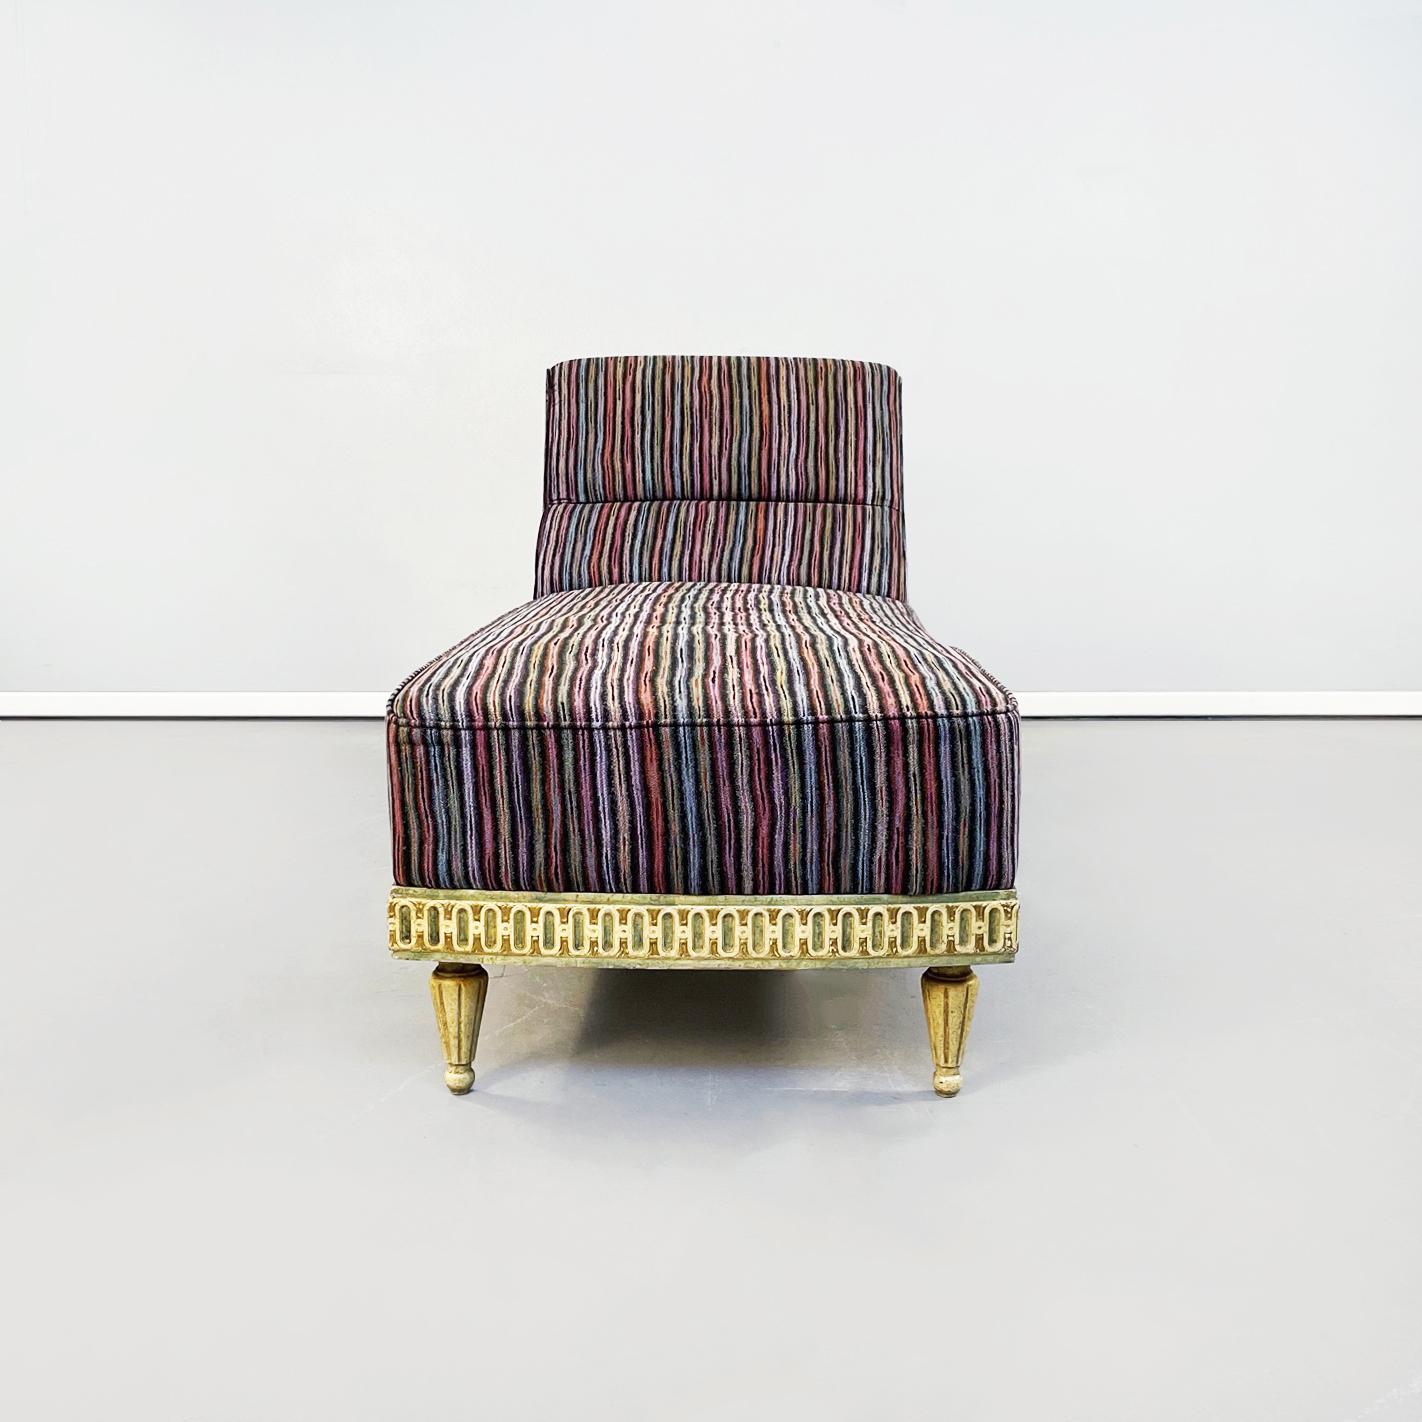 Mid-Century Modern Italian Midcentury Venetian Style Chaise Longue with Missoni Striped Fabric, 1950 For Sale